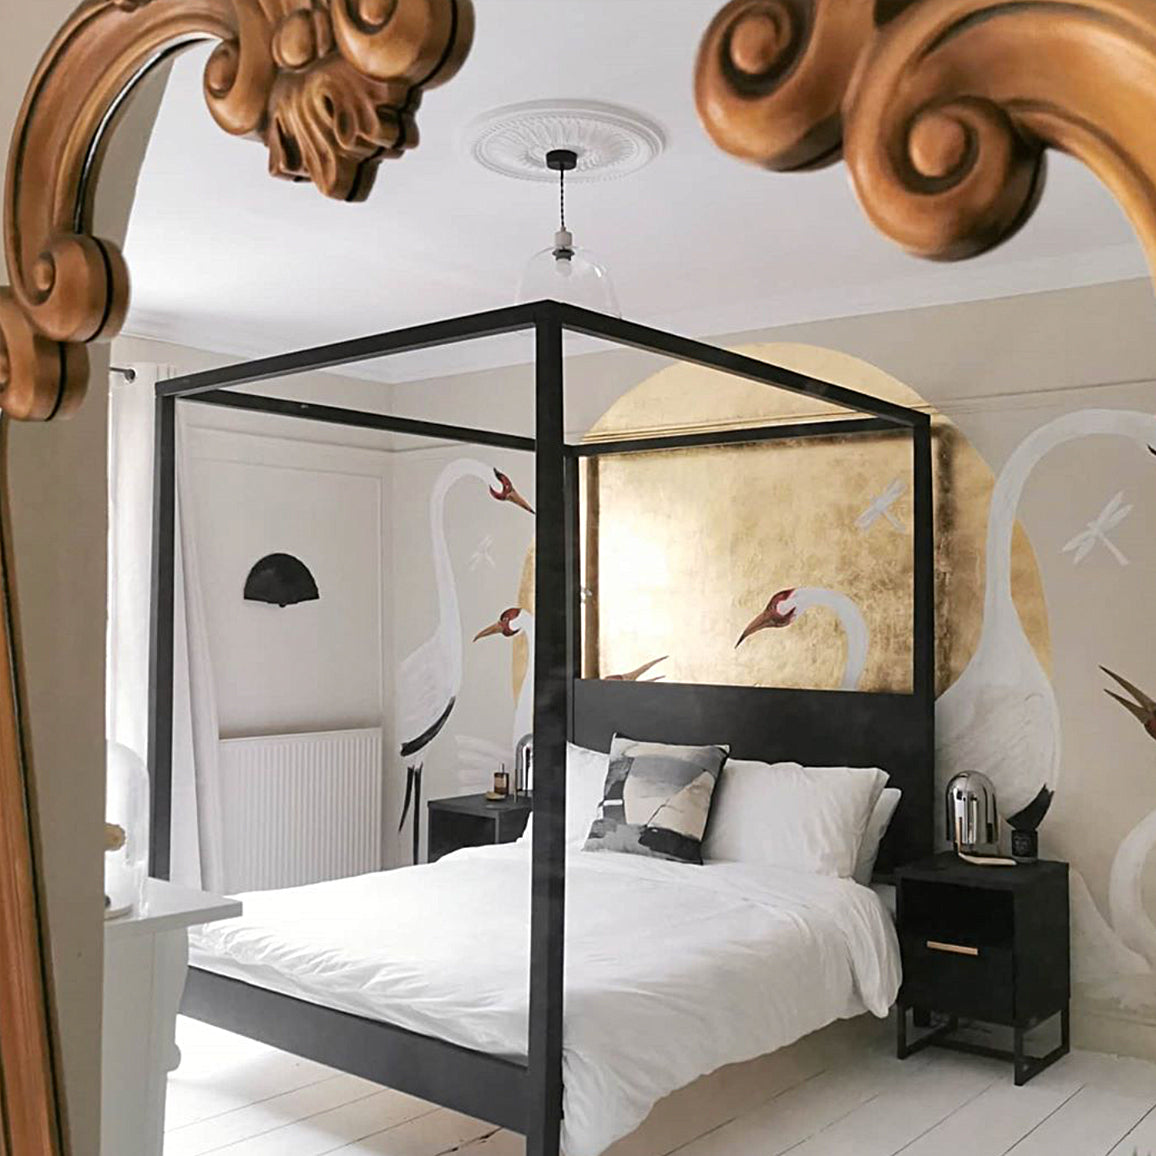 Sunflower Plaster Ceiling Rose with four poster bed